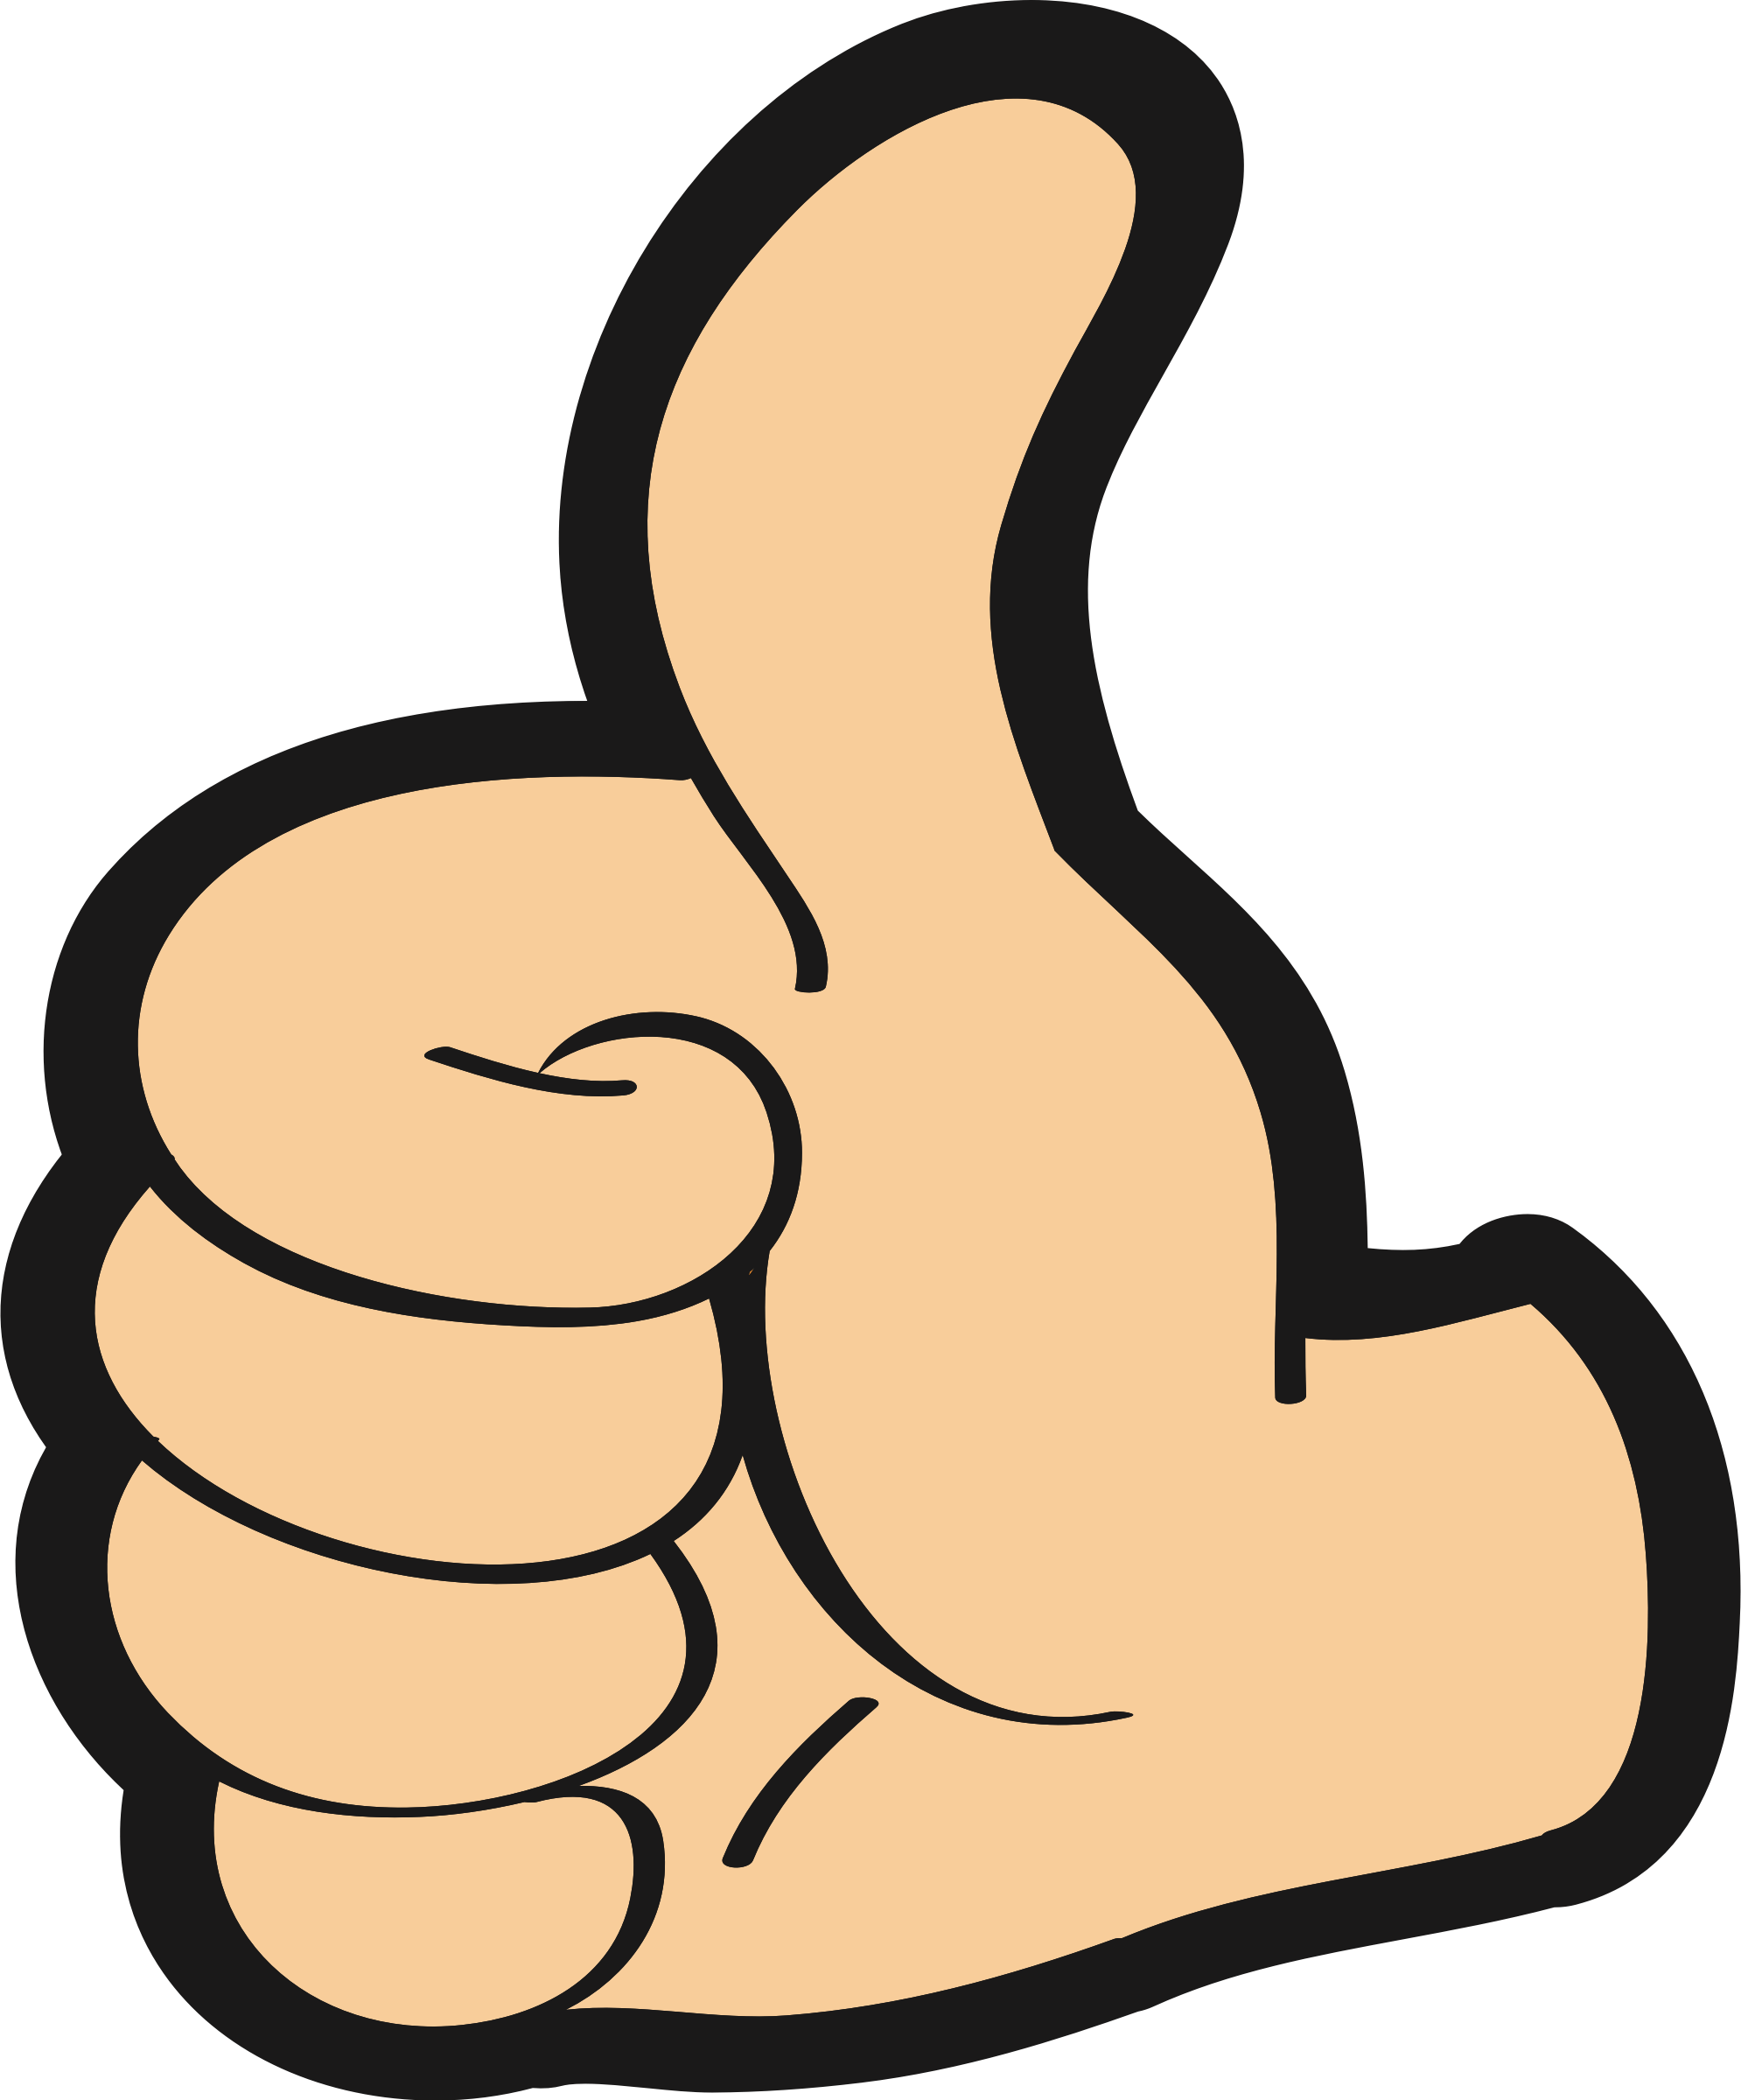 Download Thumb,artwork,hand - Thumbs Up Clipart Png - ClipartKey